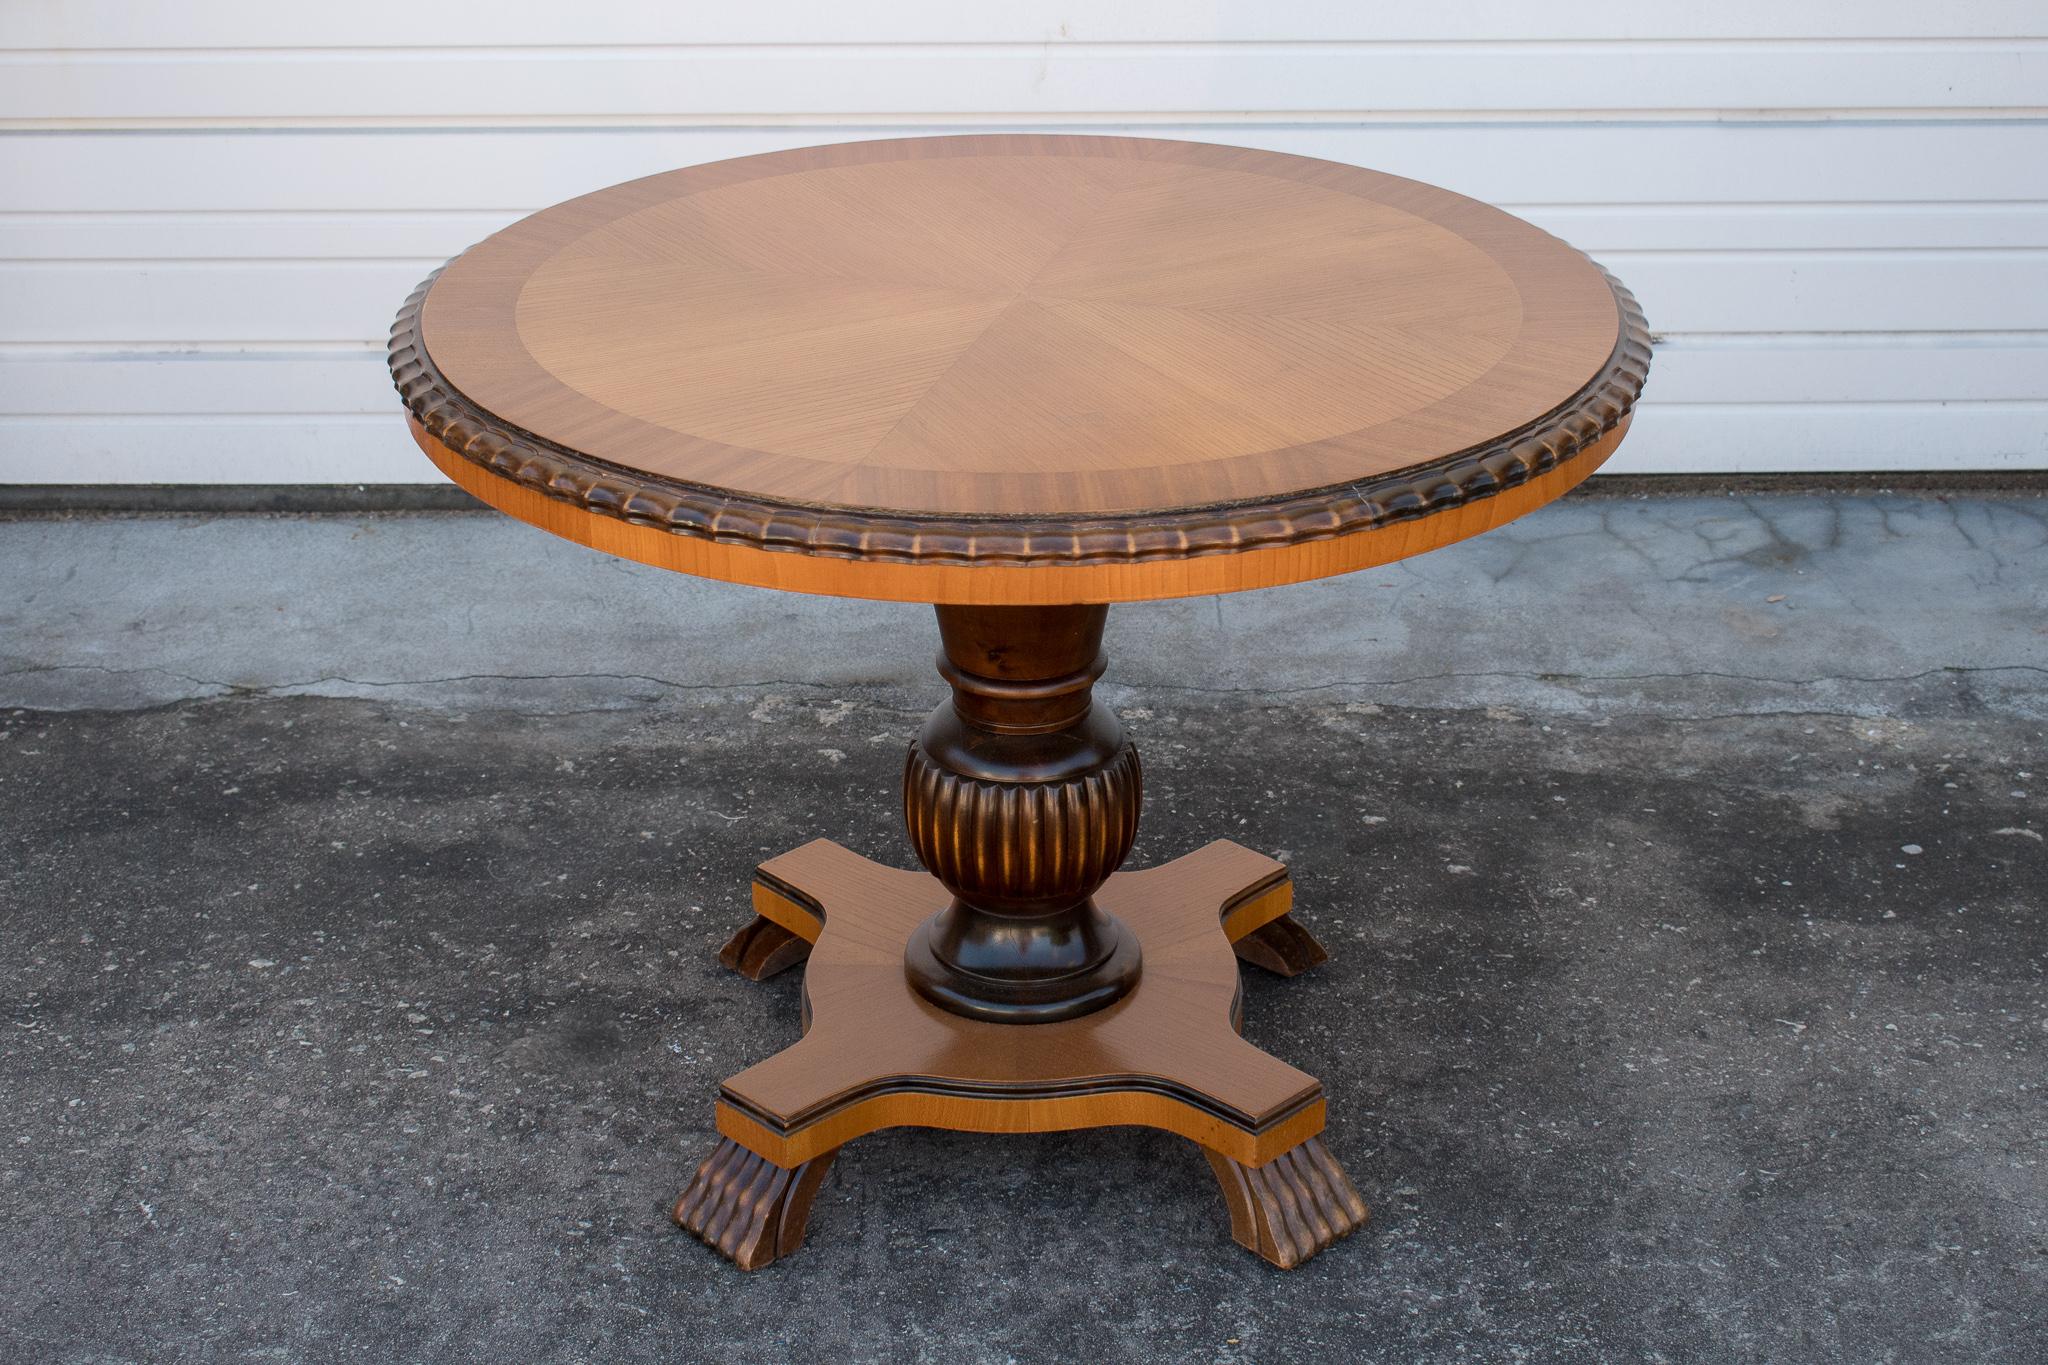 Handsome end or side table of golden book-matched elm on a golden flame birch pedestal with ebonized accents.